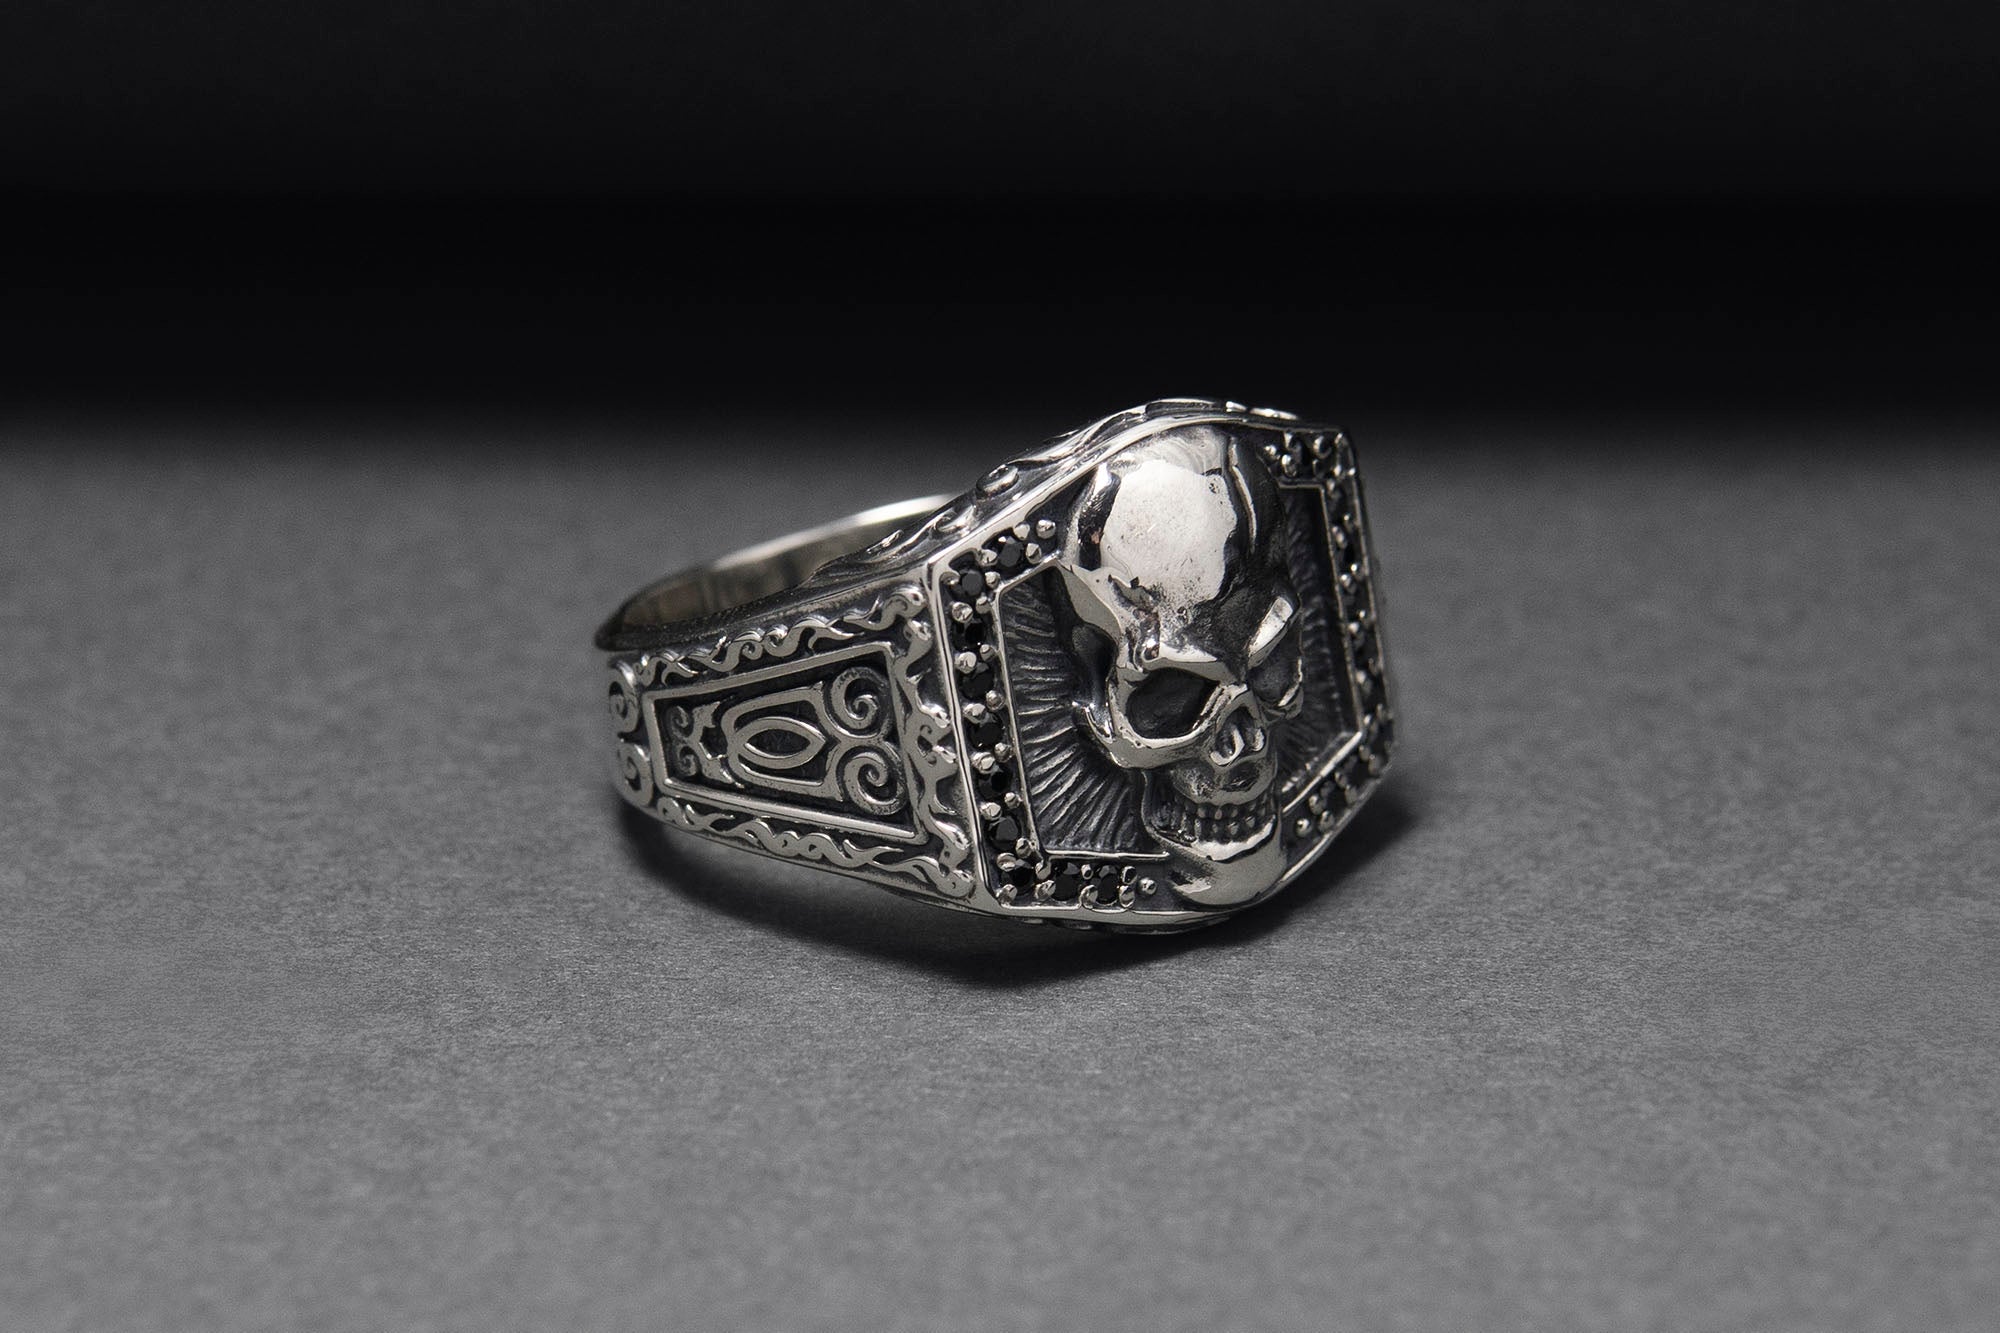 925 Silver Skull Signet Ring with Ornament, Handcrafted Biker Jewelry